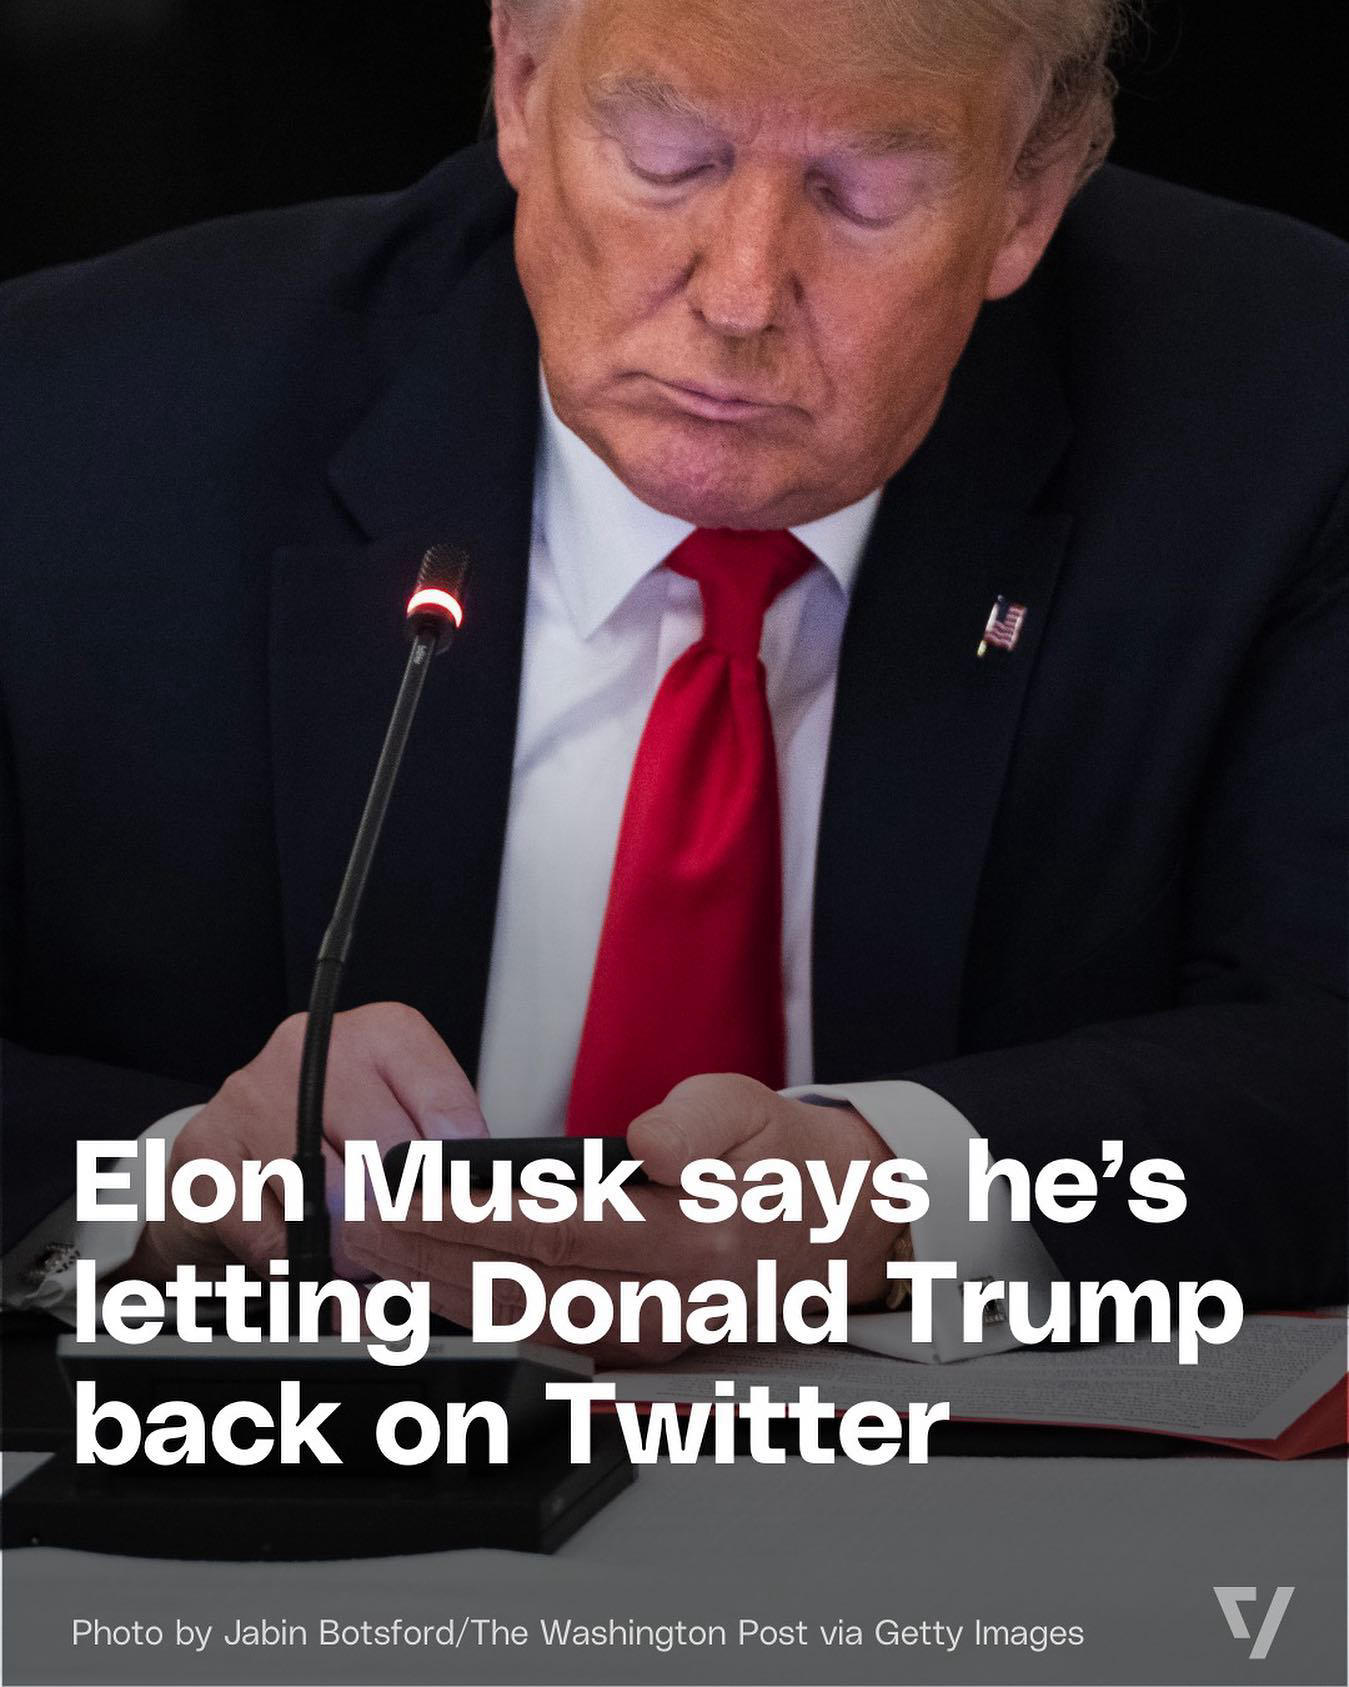 image  1 The Verge - Donald Trump is allowed to rejoin Twitter, Elon Musk has announced